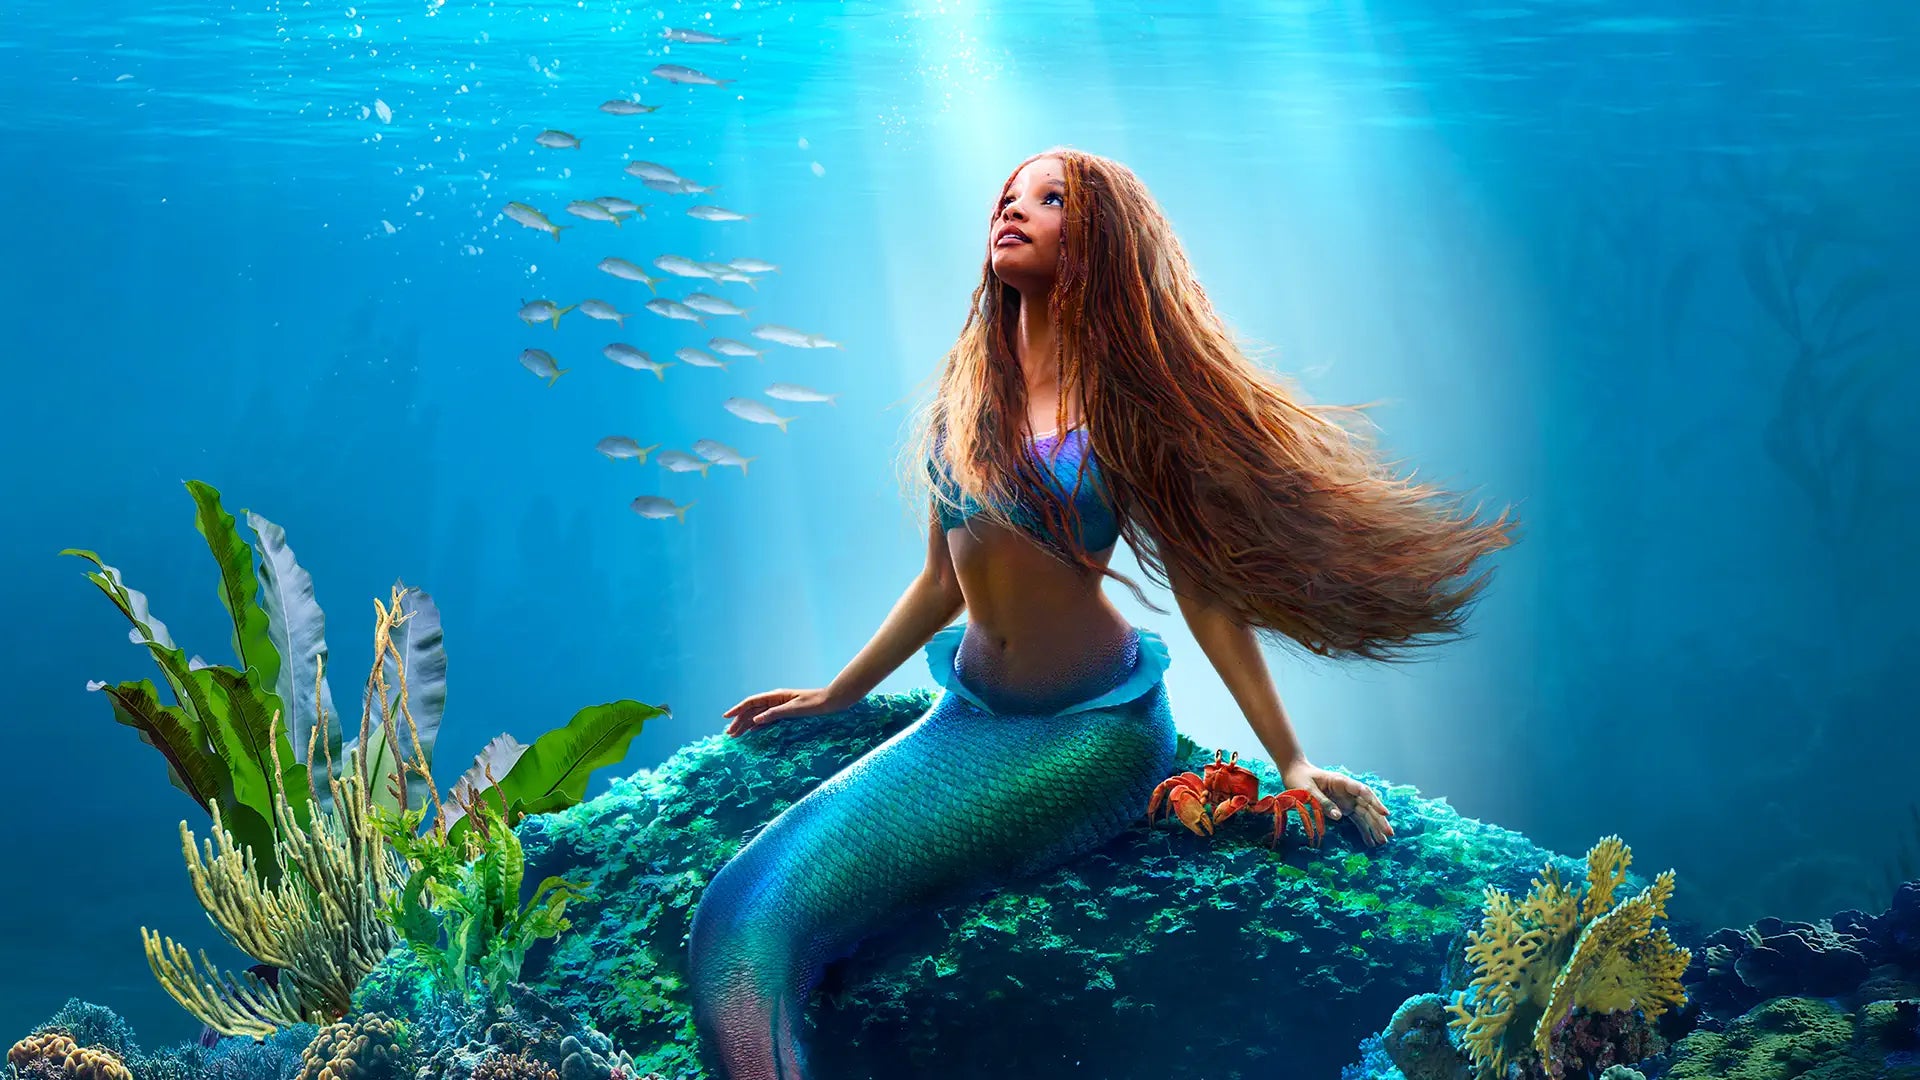 The Little Mermaid  Official Trailer 